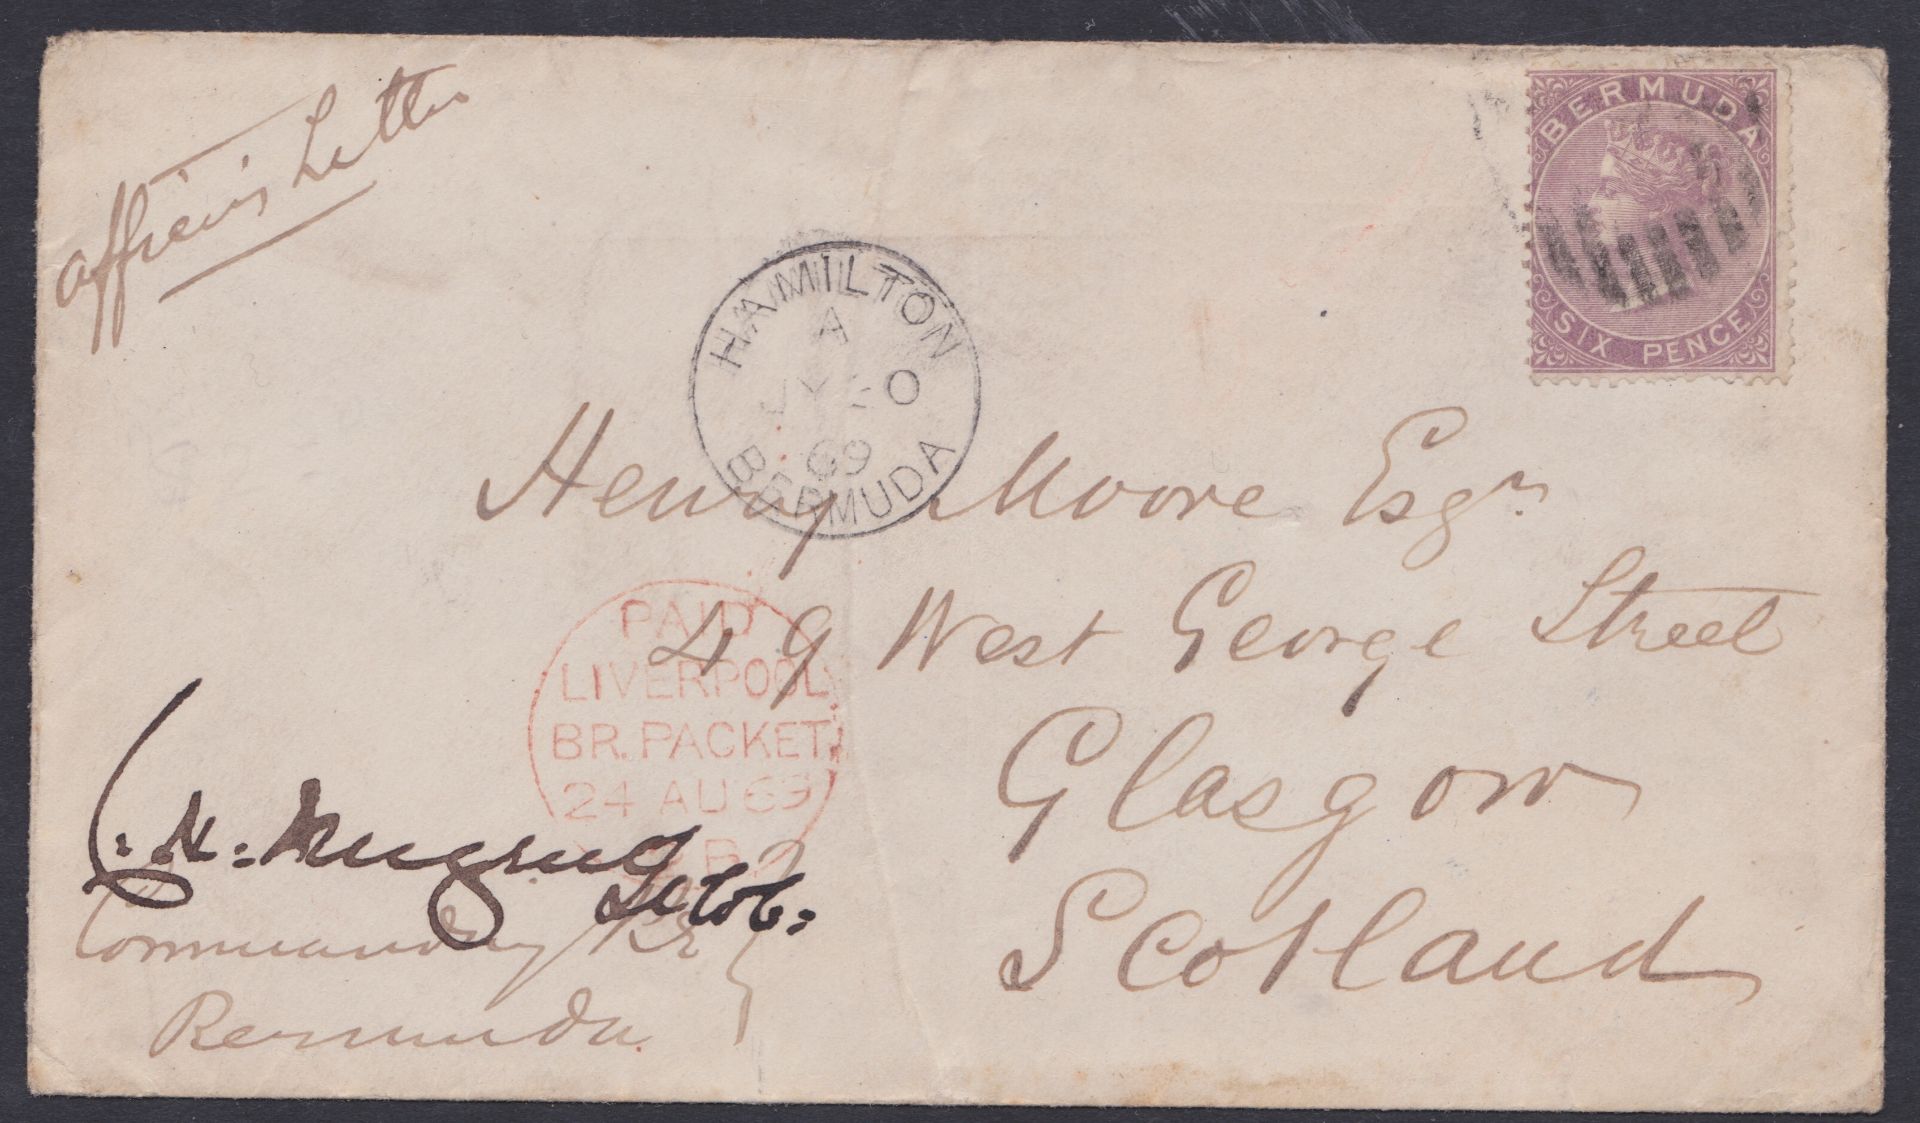 BERMUDA 1869 - Cover to Glasgow endorsed "Officers Letter" and signed by the Commanding Officer of